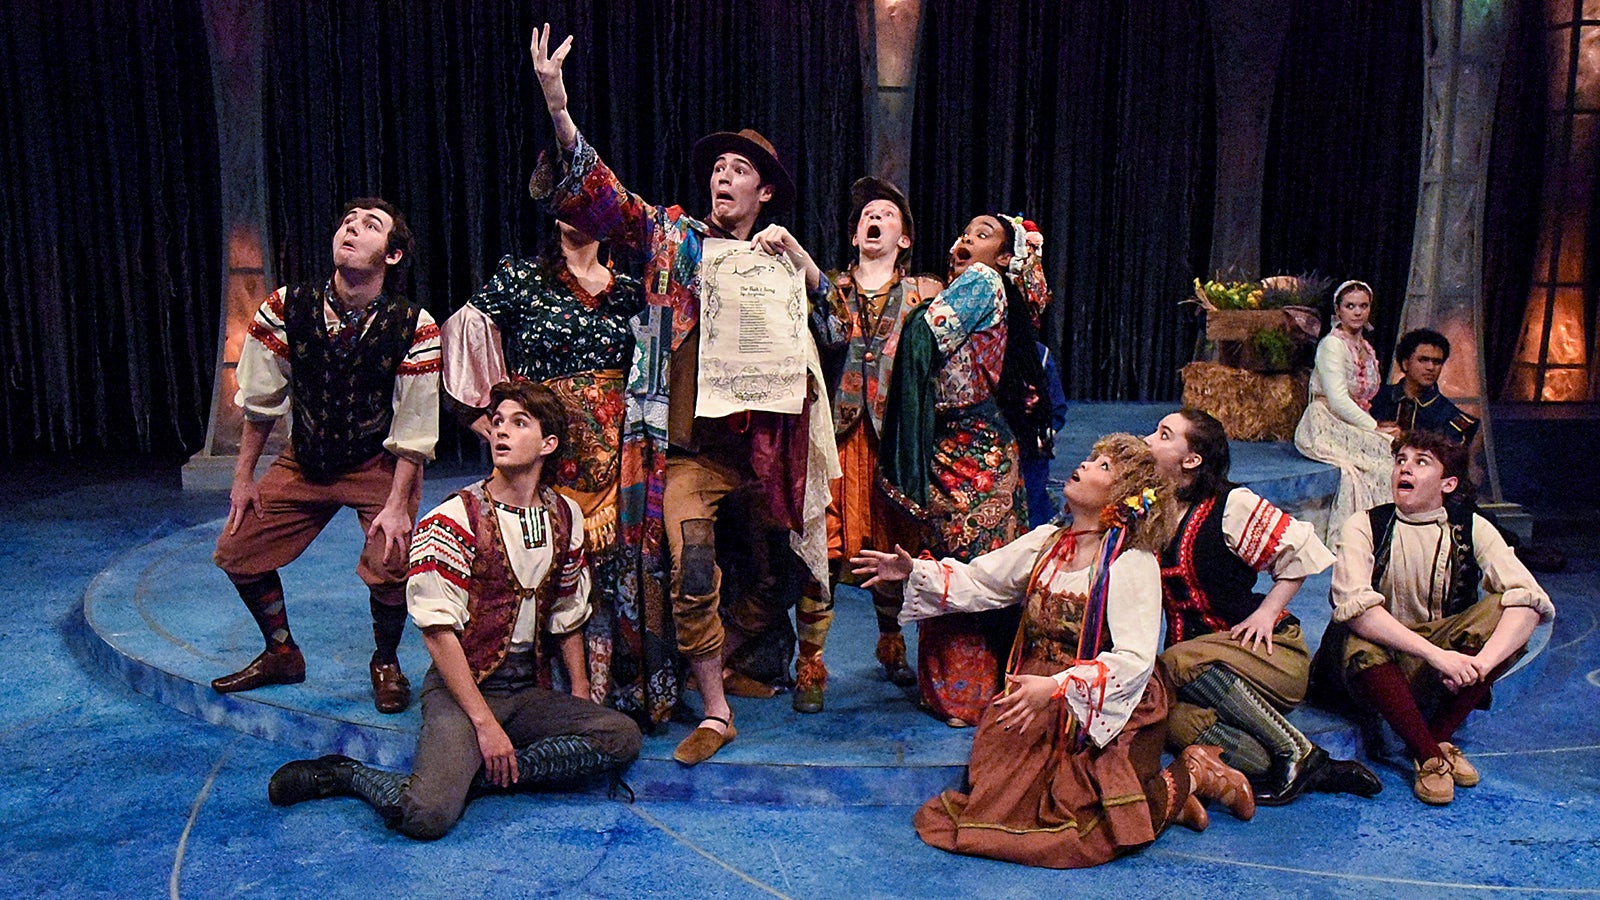 Students perform a musical on stage.